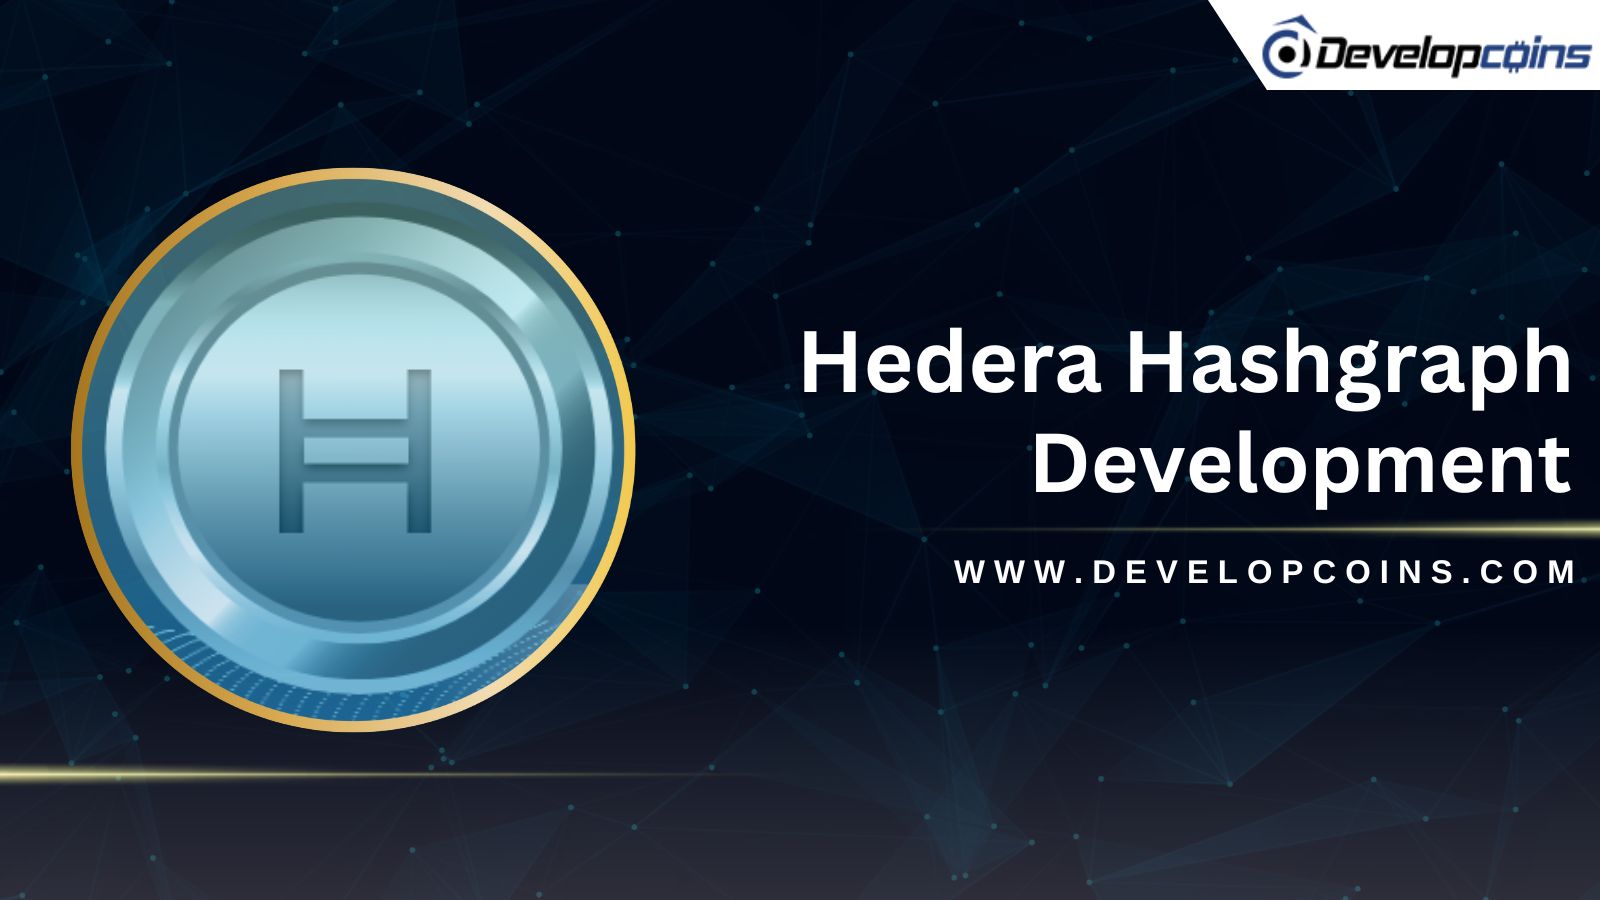 Hedera Hashgraph Development To Build Your Own Decentralized Applications On Hedera Network